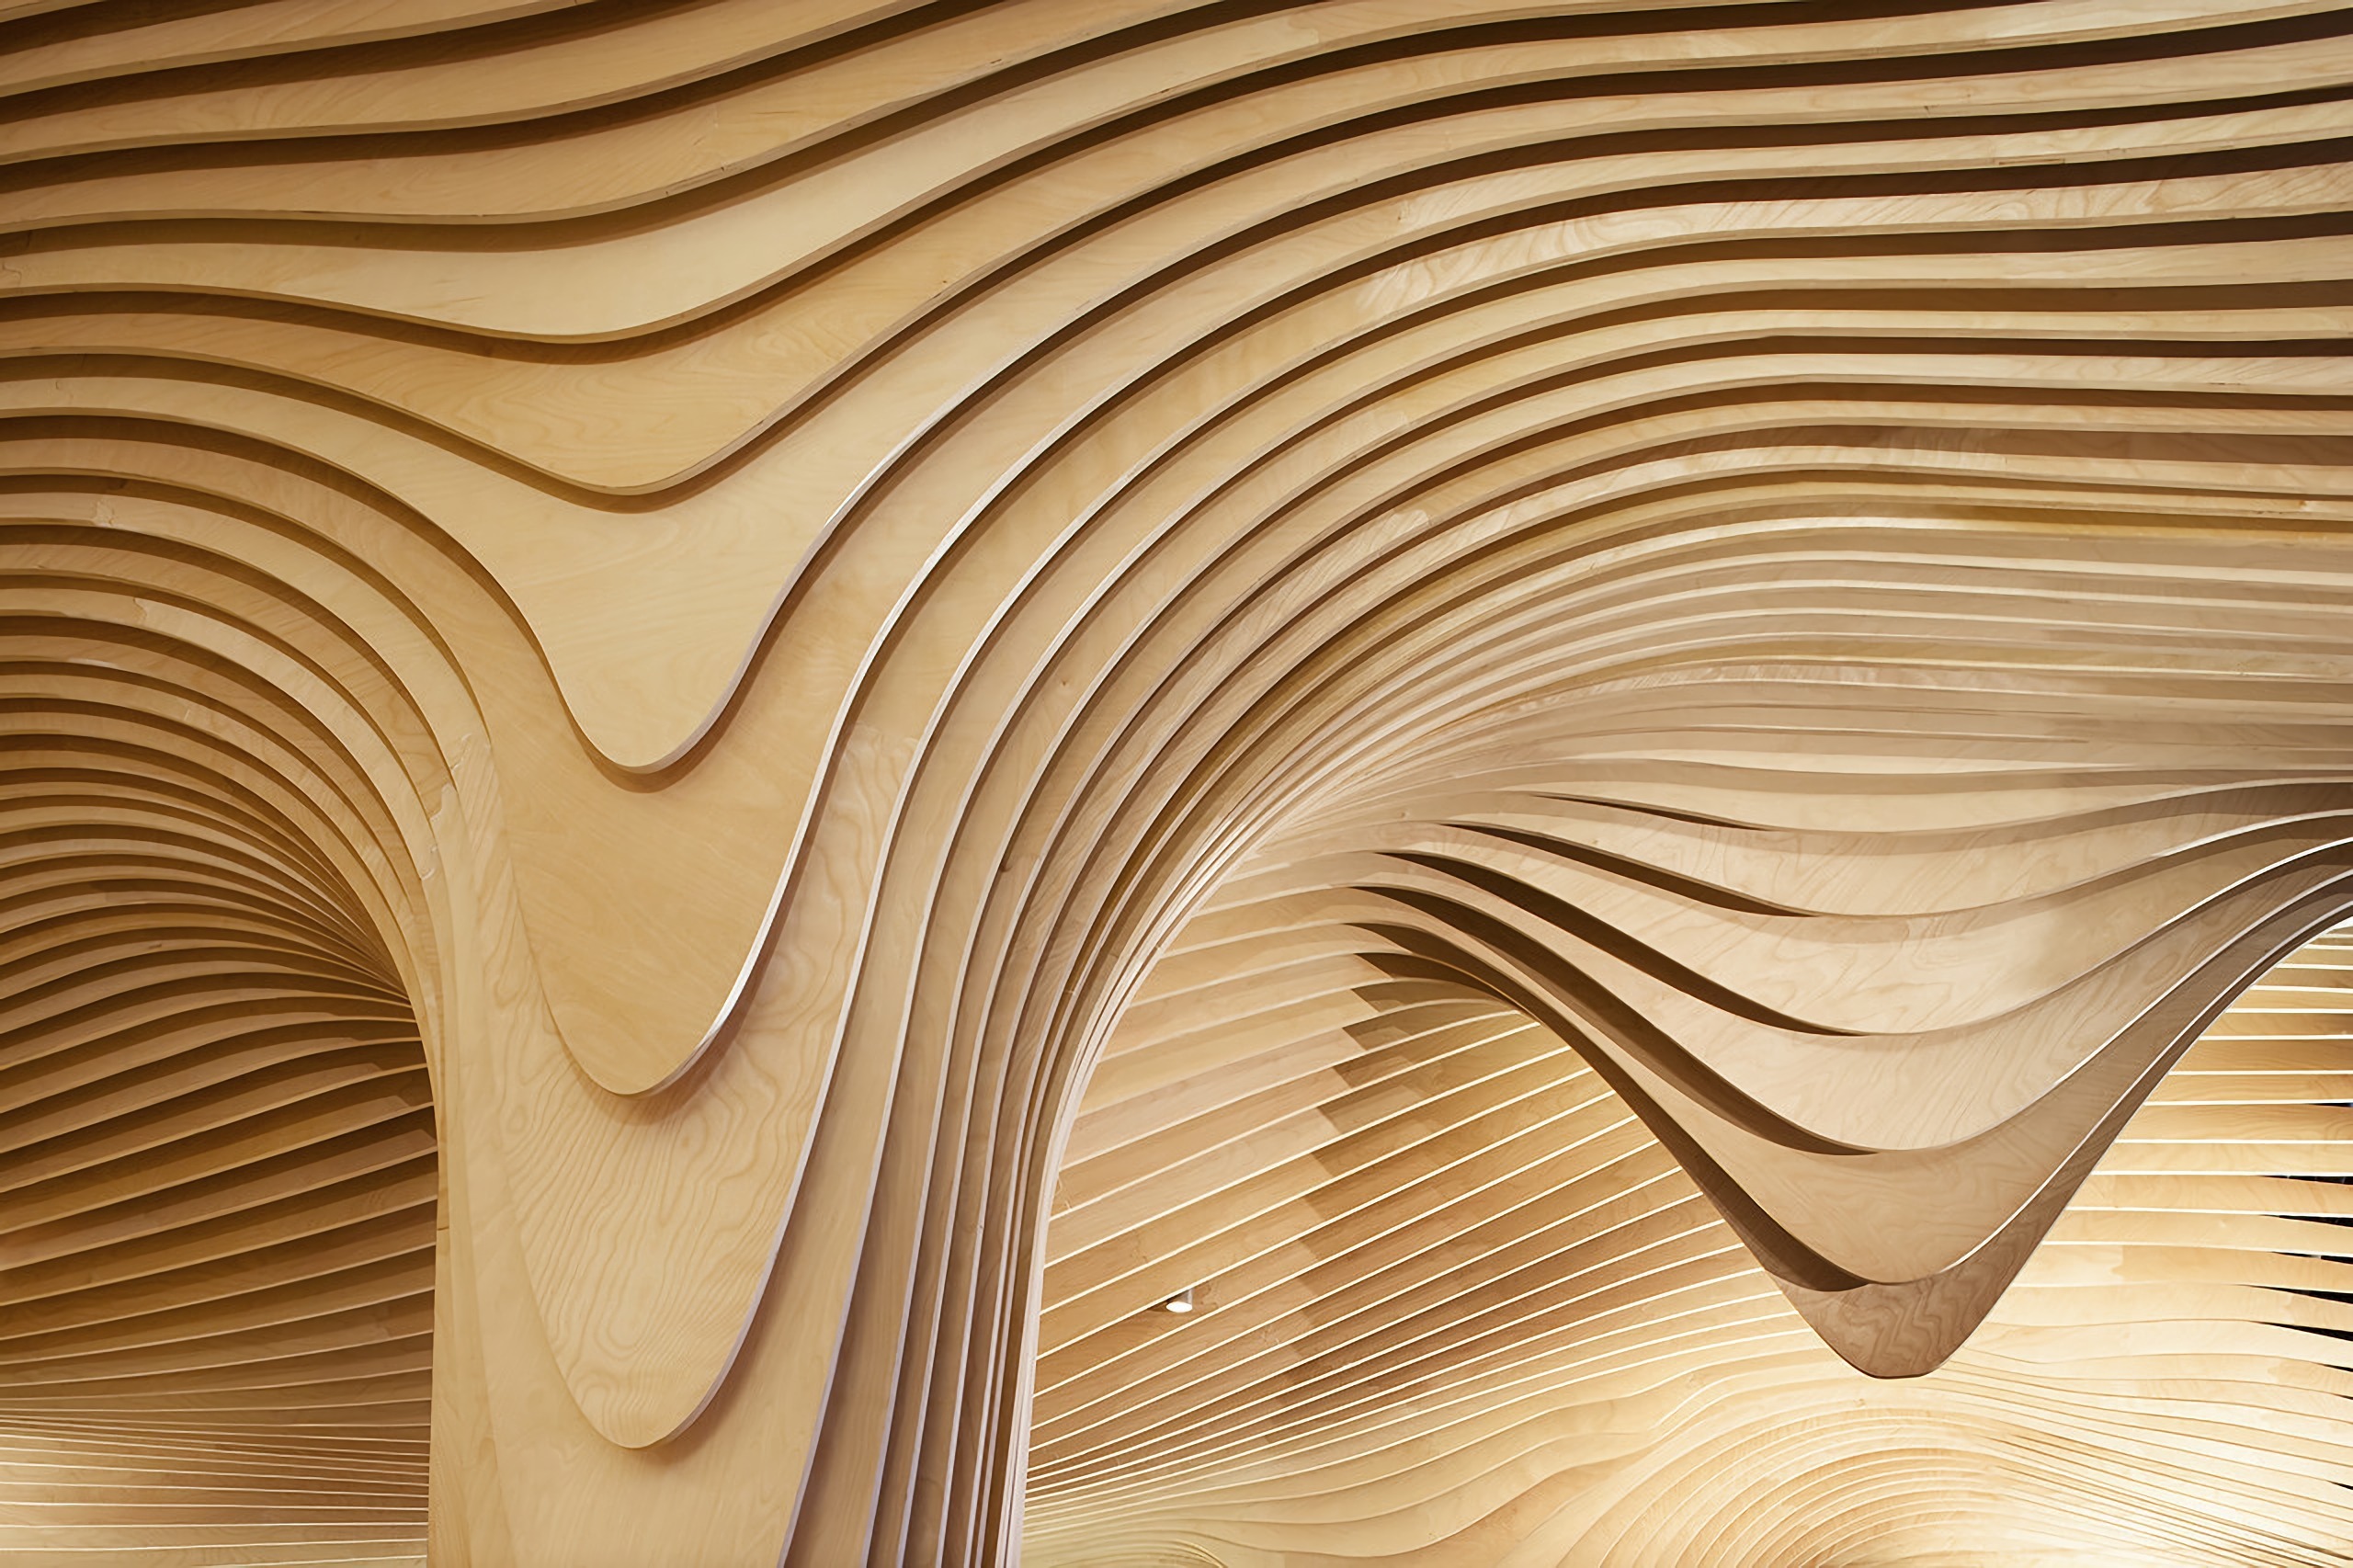 (Details of corrugated plywood elements)